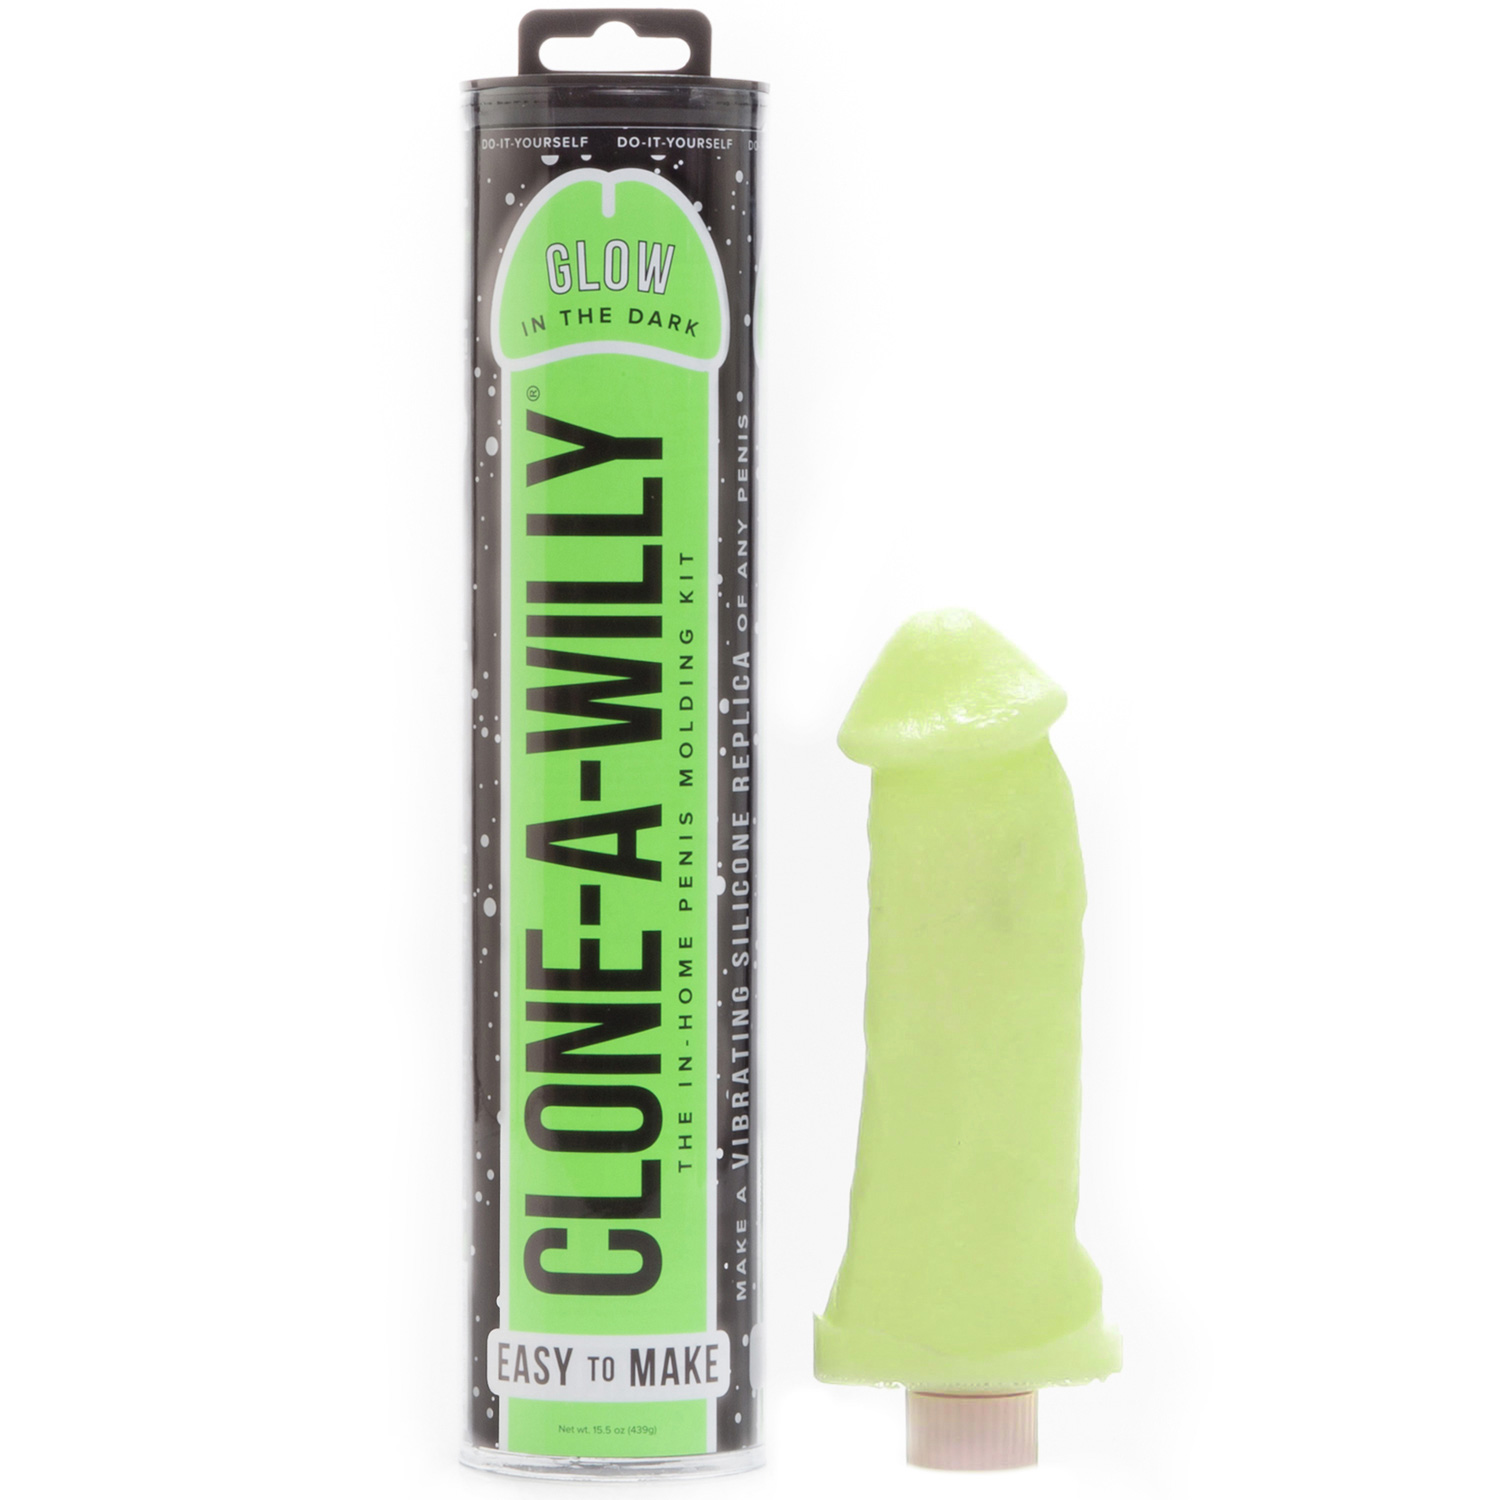 Clone-A-Willy Glow in the Dark - Clone-A-Willy